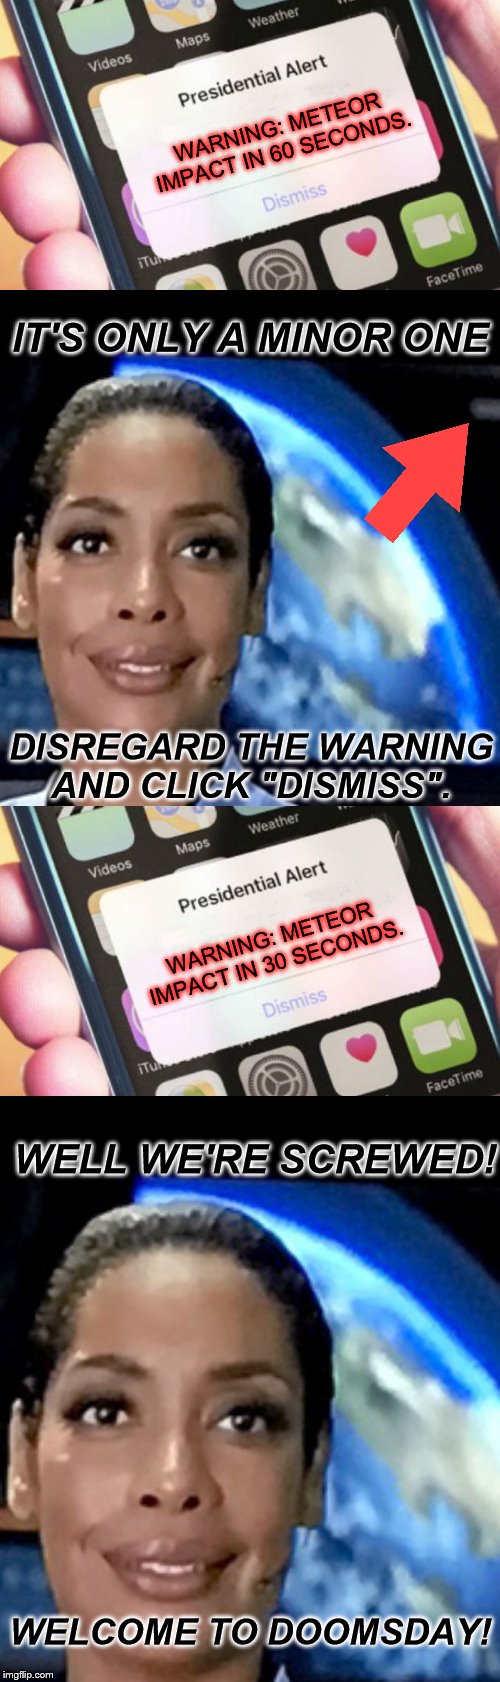 Doomsday Meme reaction *Hilarious* | WARNING: METEOR IMPACT IN 60 SECONDS. IT'S ONLY A MINOR ONE; DISREGARD THE WARNING AND CLICK "DISMISS". WARNING: METEOR IMPACT IN 30 SECONDS. WELL WE'RE SCREWED! WELCOME TO DOOMSDAY! | image tagged in memes,presidential alert,mission space sarcastic edition,doomsday,warning | made w/ Imgflip meme maker